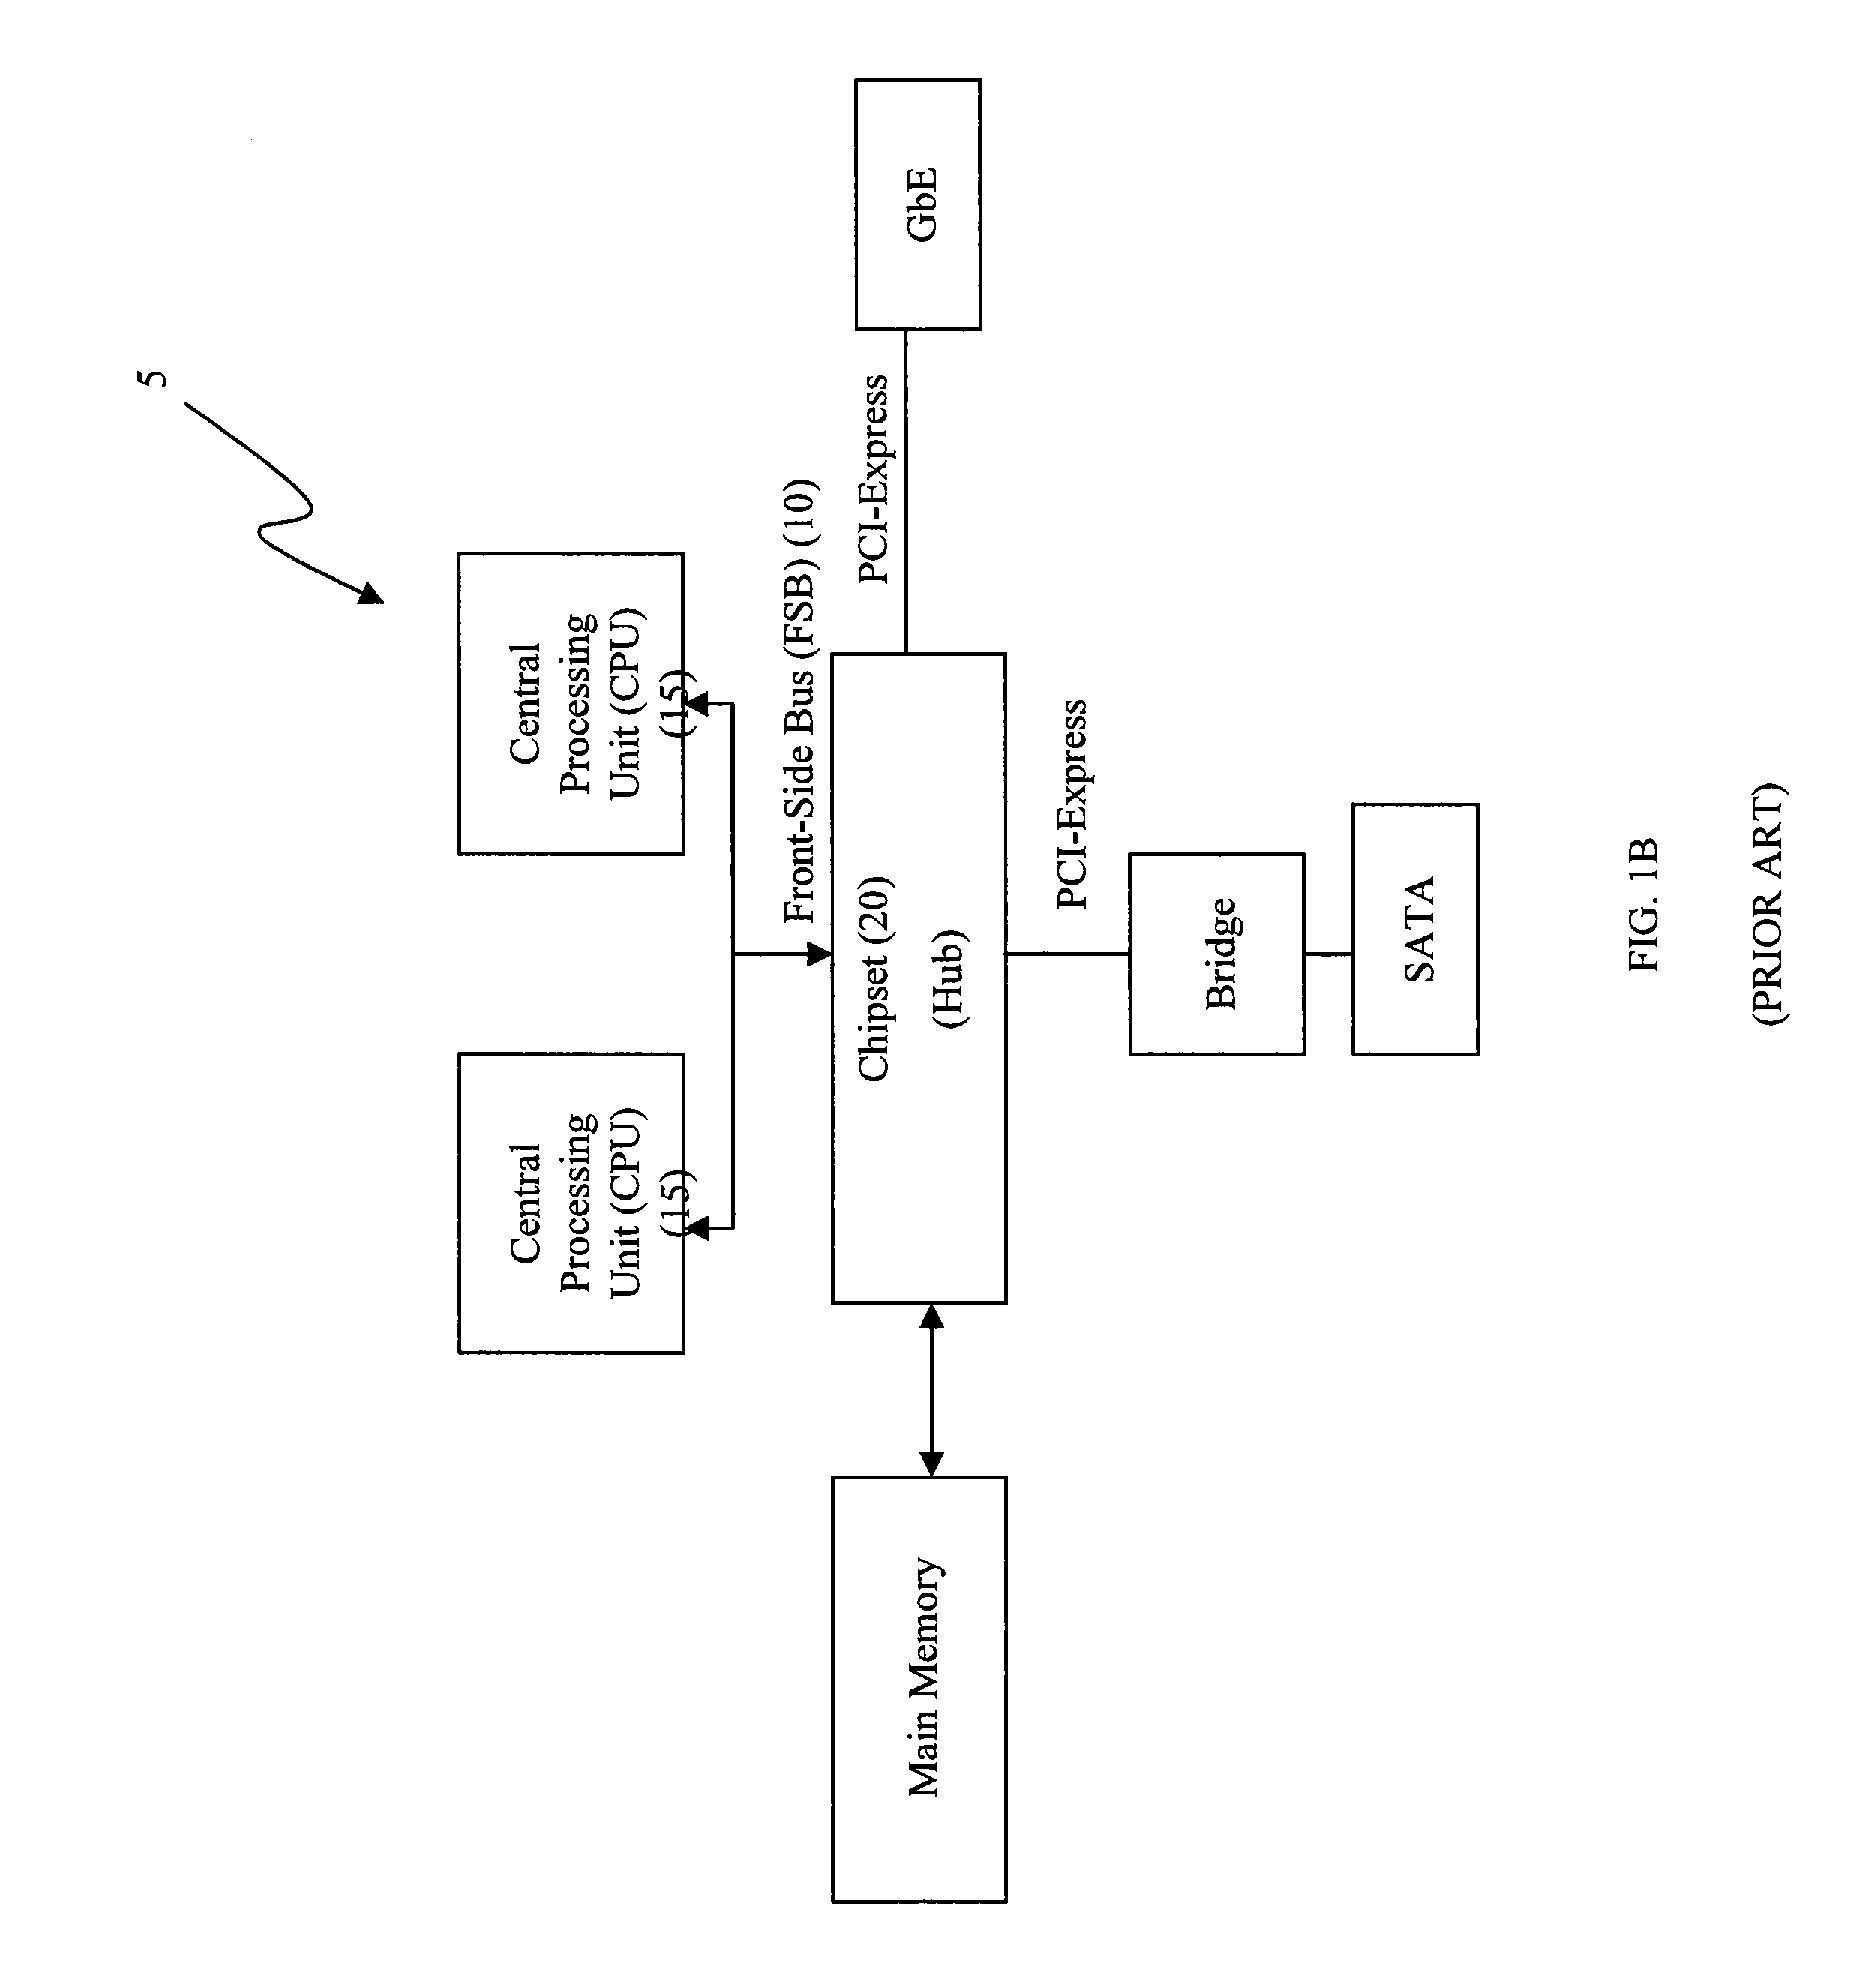 On-chip packet interface processor encapsulating memory access from main processor to external system memory in serial packet switched protocol